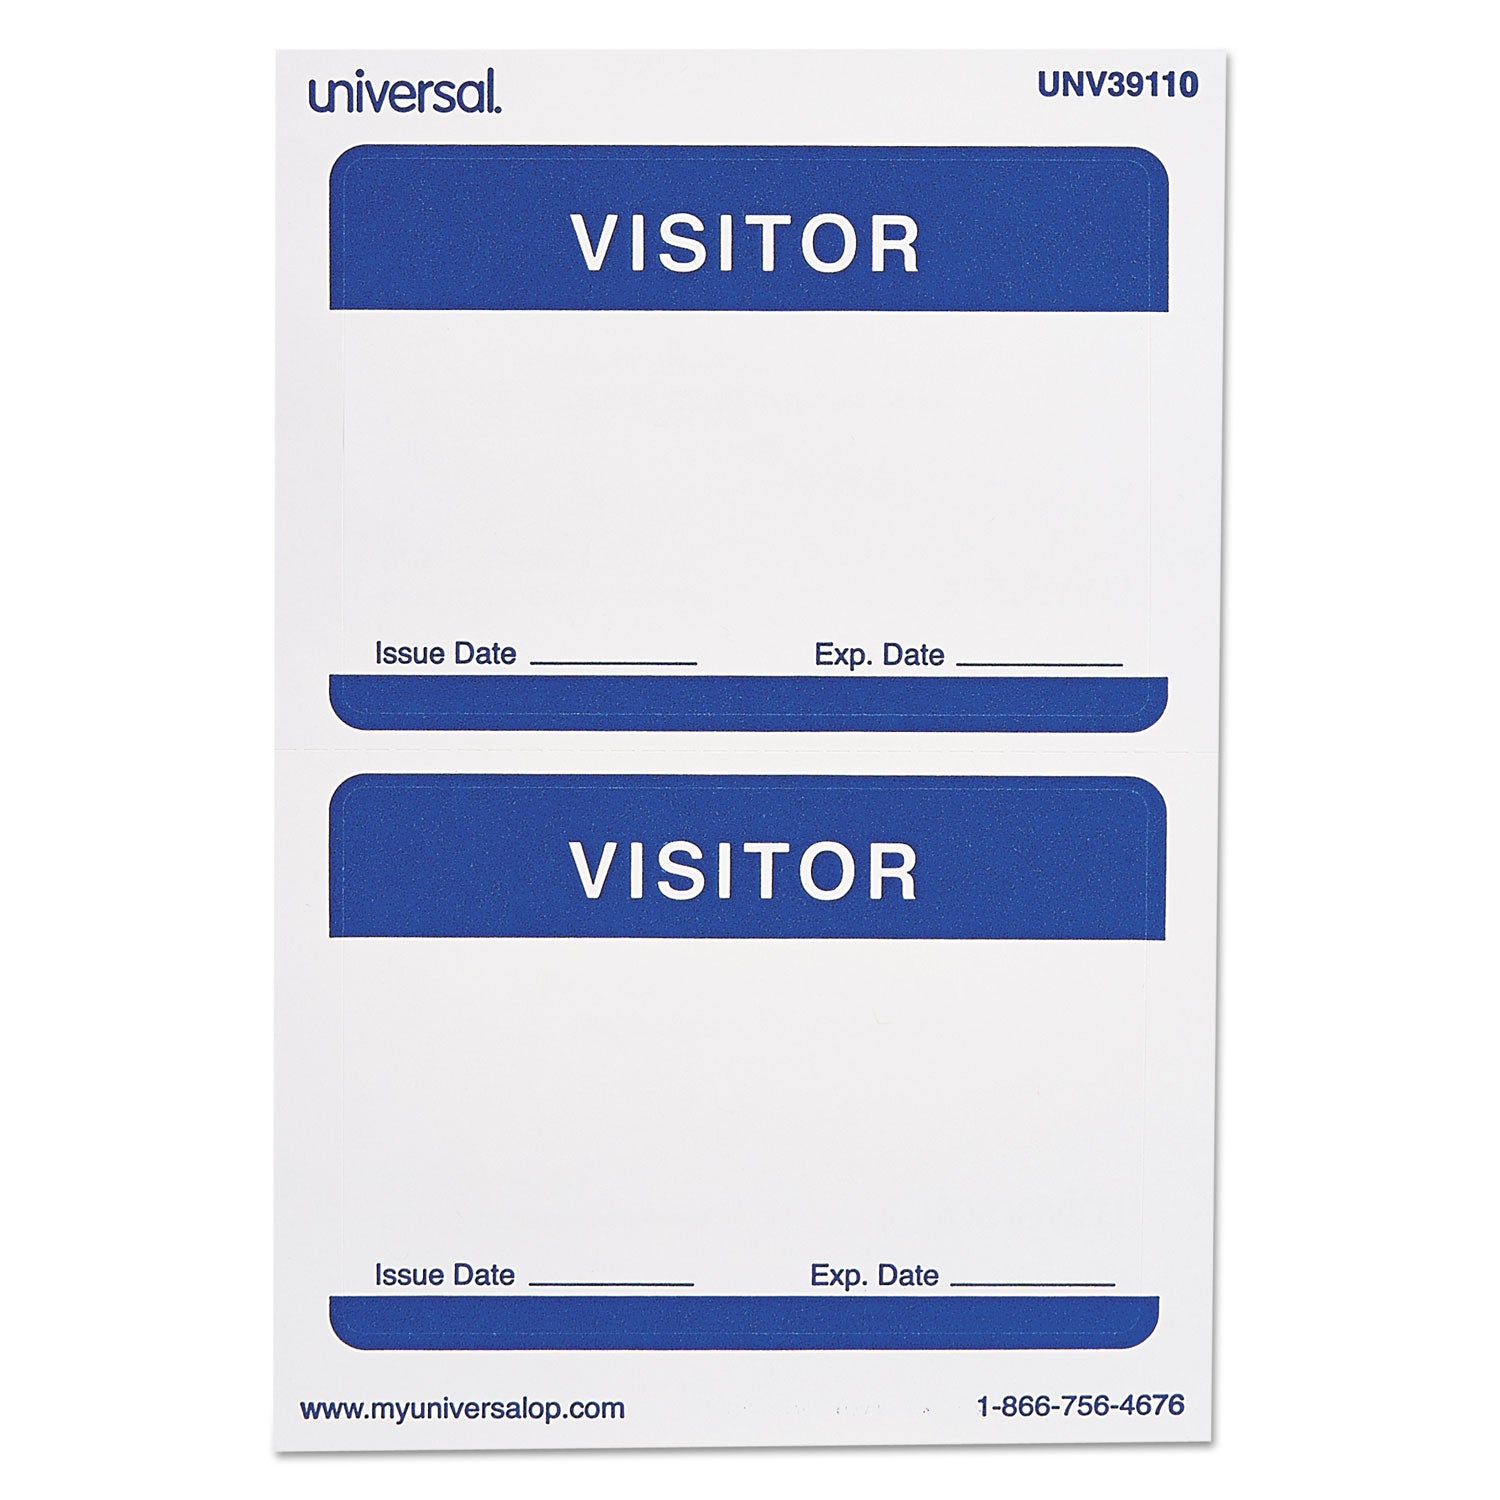 Visitor Self-Adhesive Name Badges, 3.5 x 2.25, White/Blue, 100/Pack - 